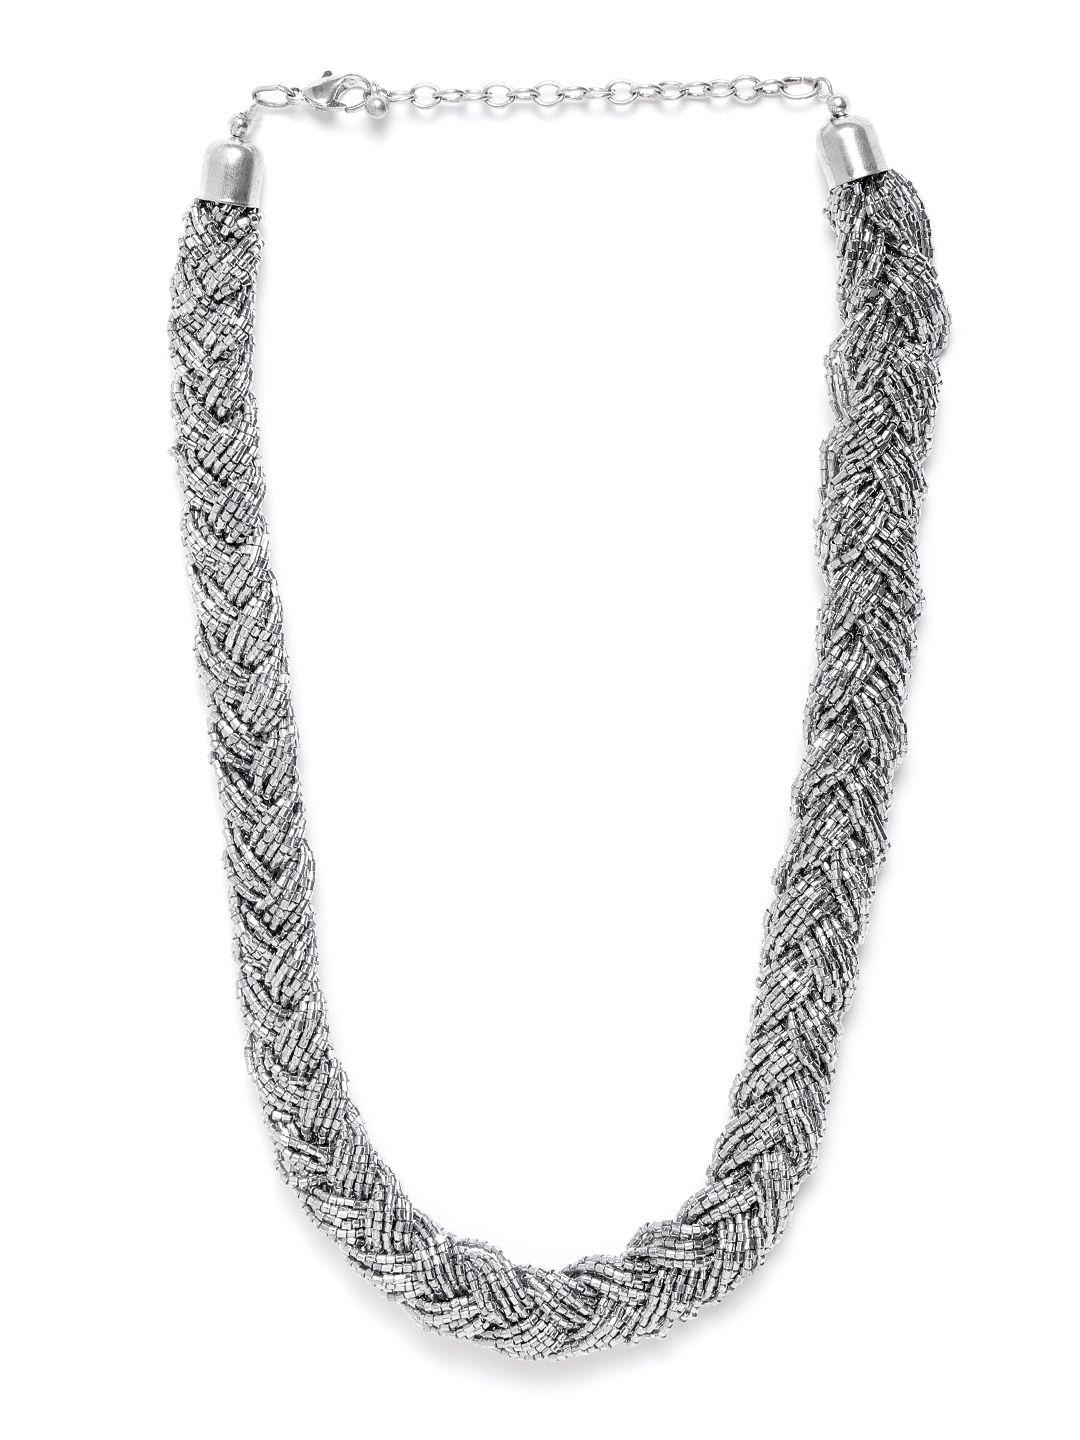 richeera silver-toned glass beaded statement braided necklace